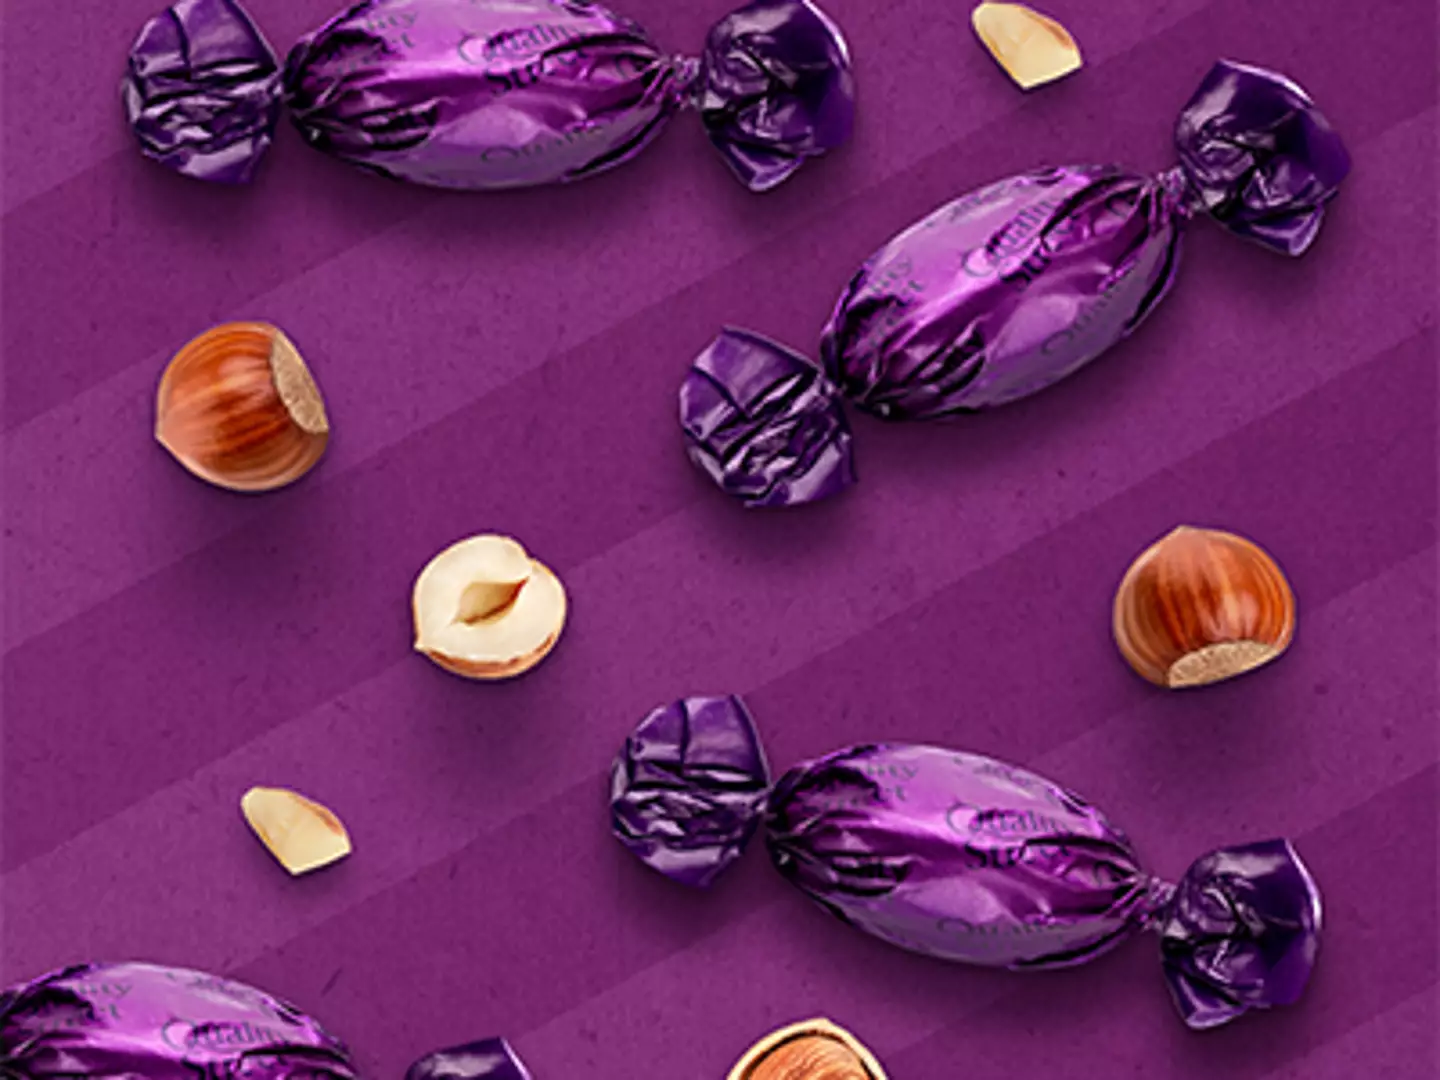 The Purple One, often regarded as the nation's favourite Quality Street, is changing shape as well.